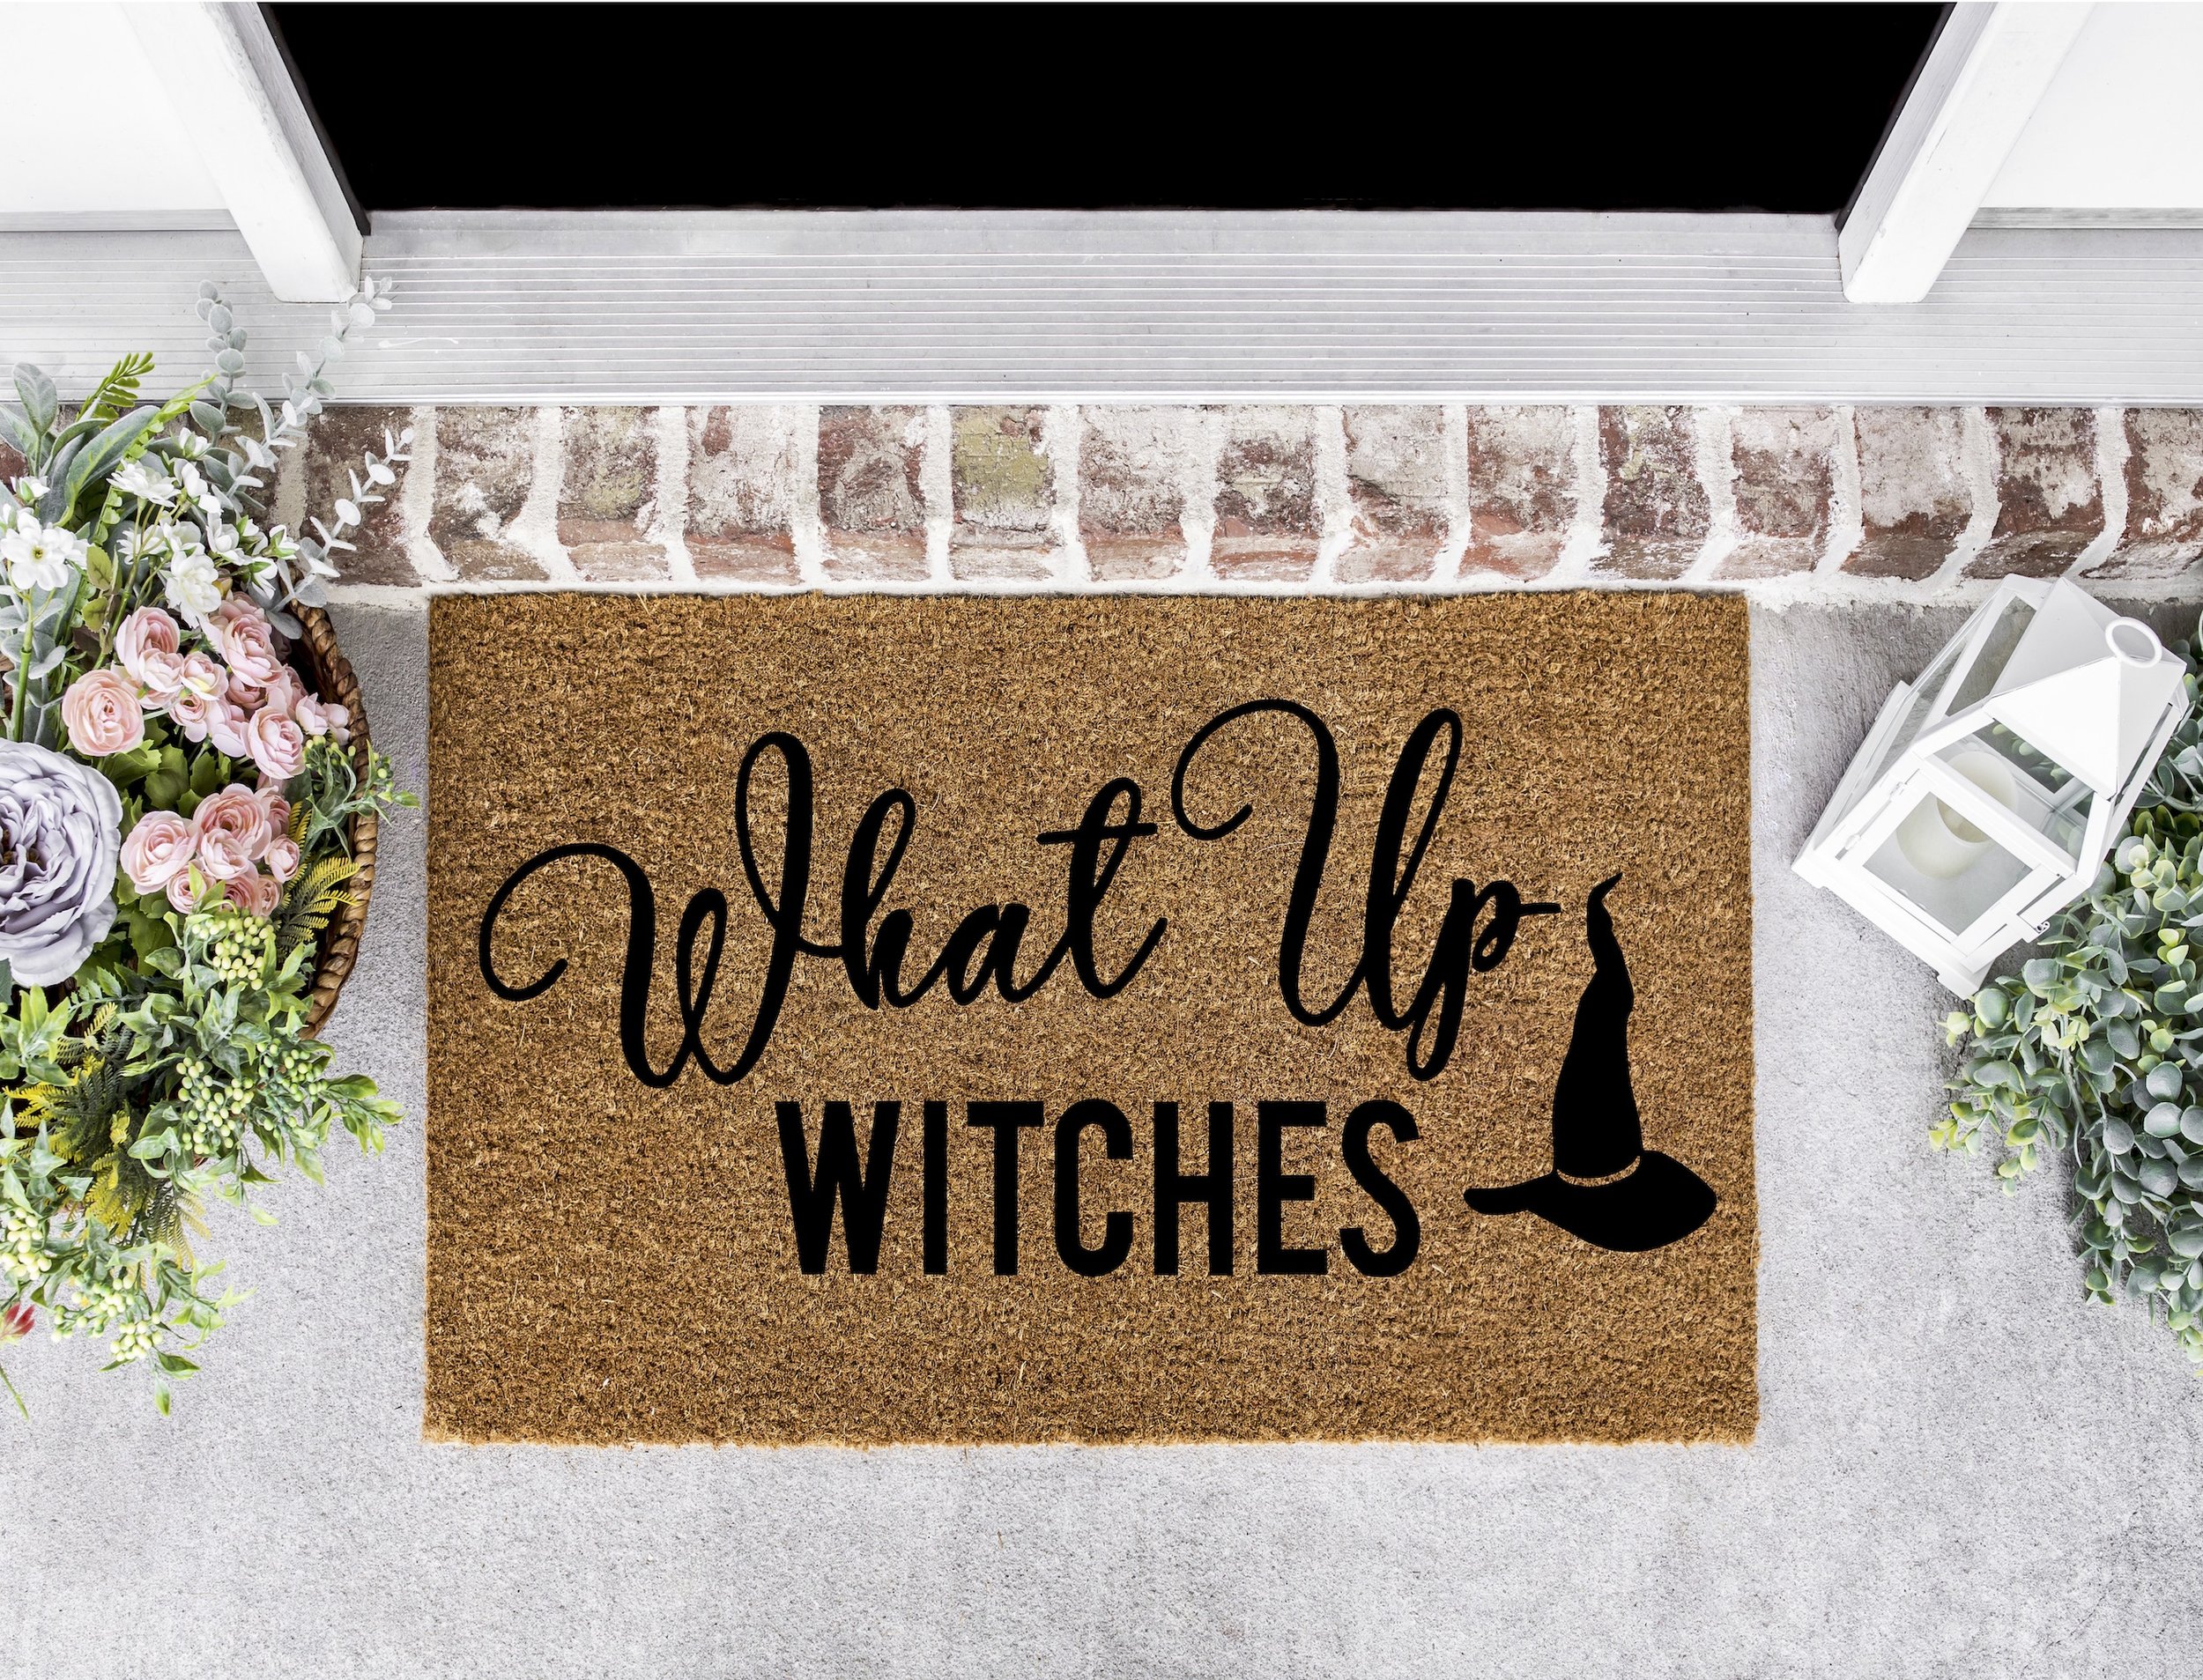 Whats Up Witches Doormat.jpg